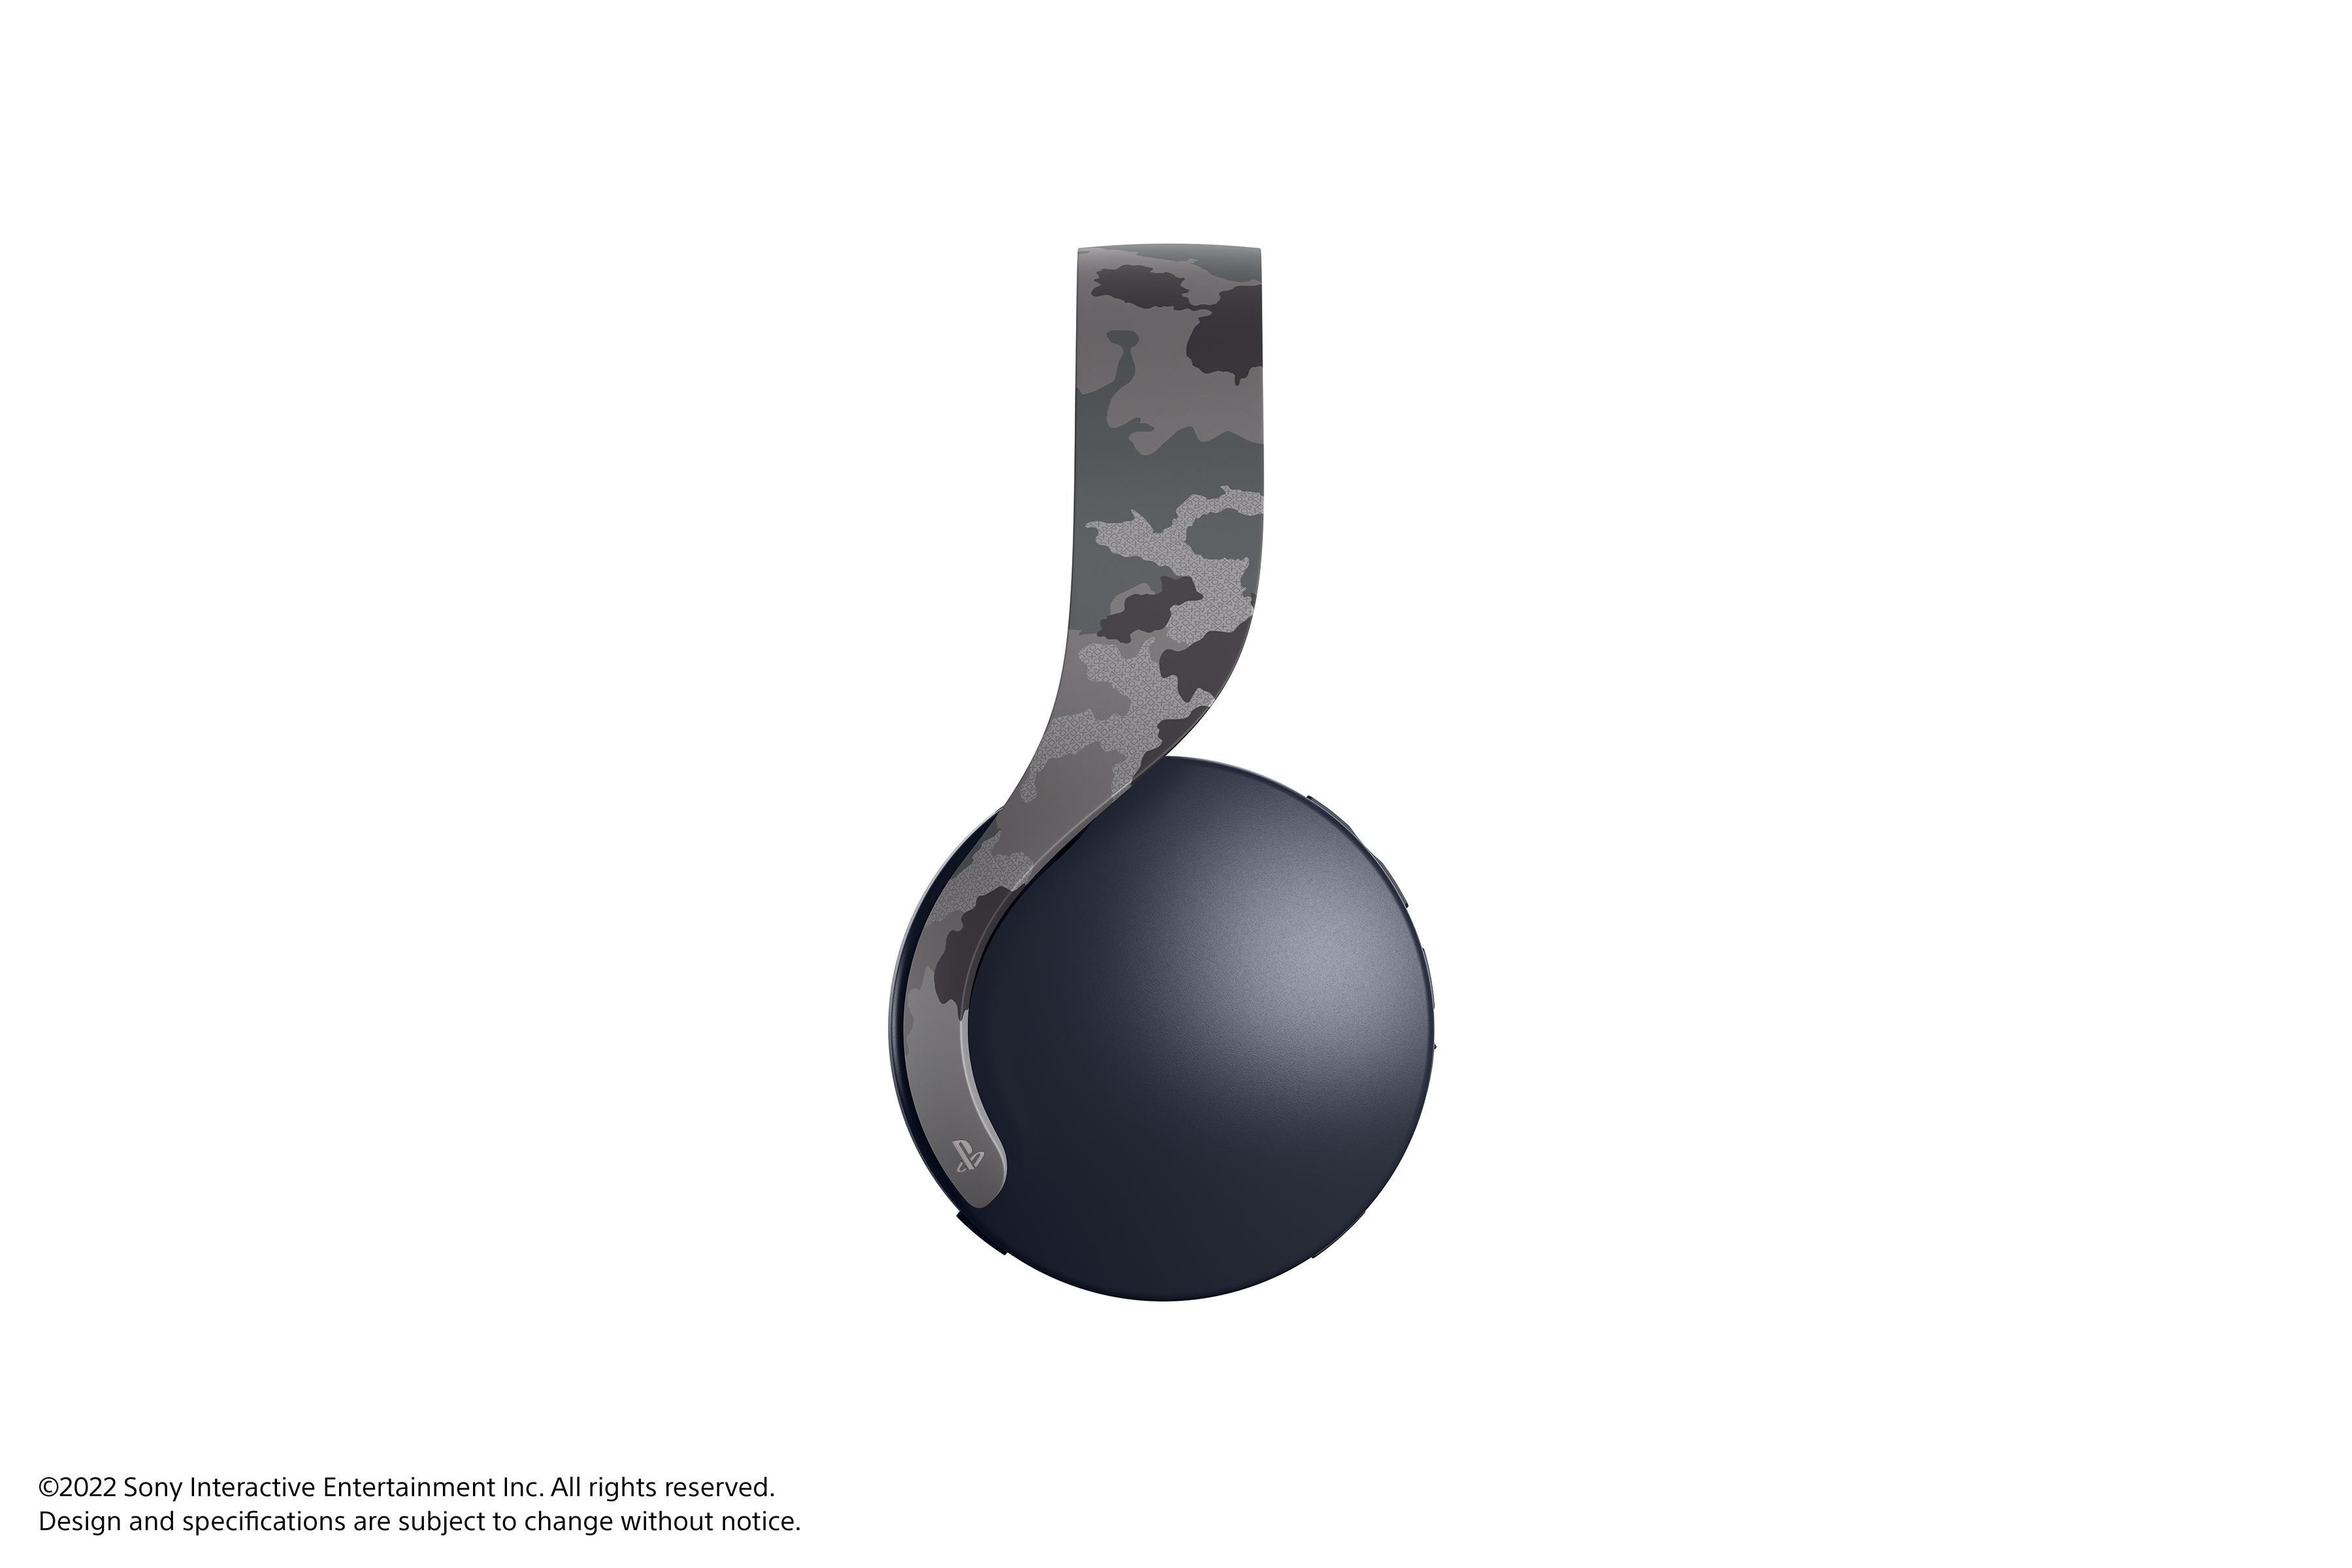 SONY PULSE Over-ear Gaming Grau/Camouflage 3D™, Bluetooth Headset